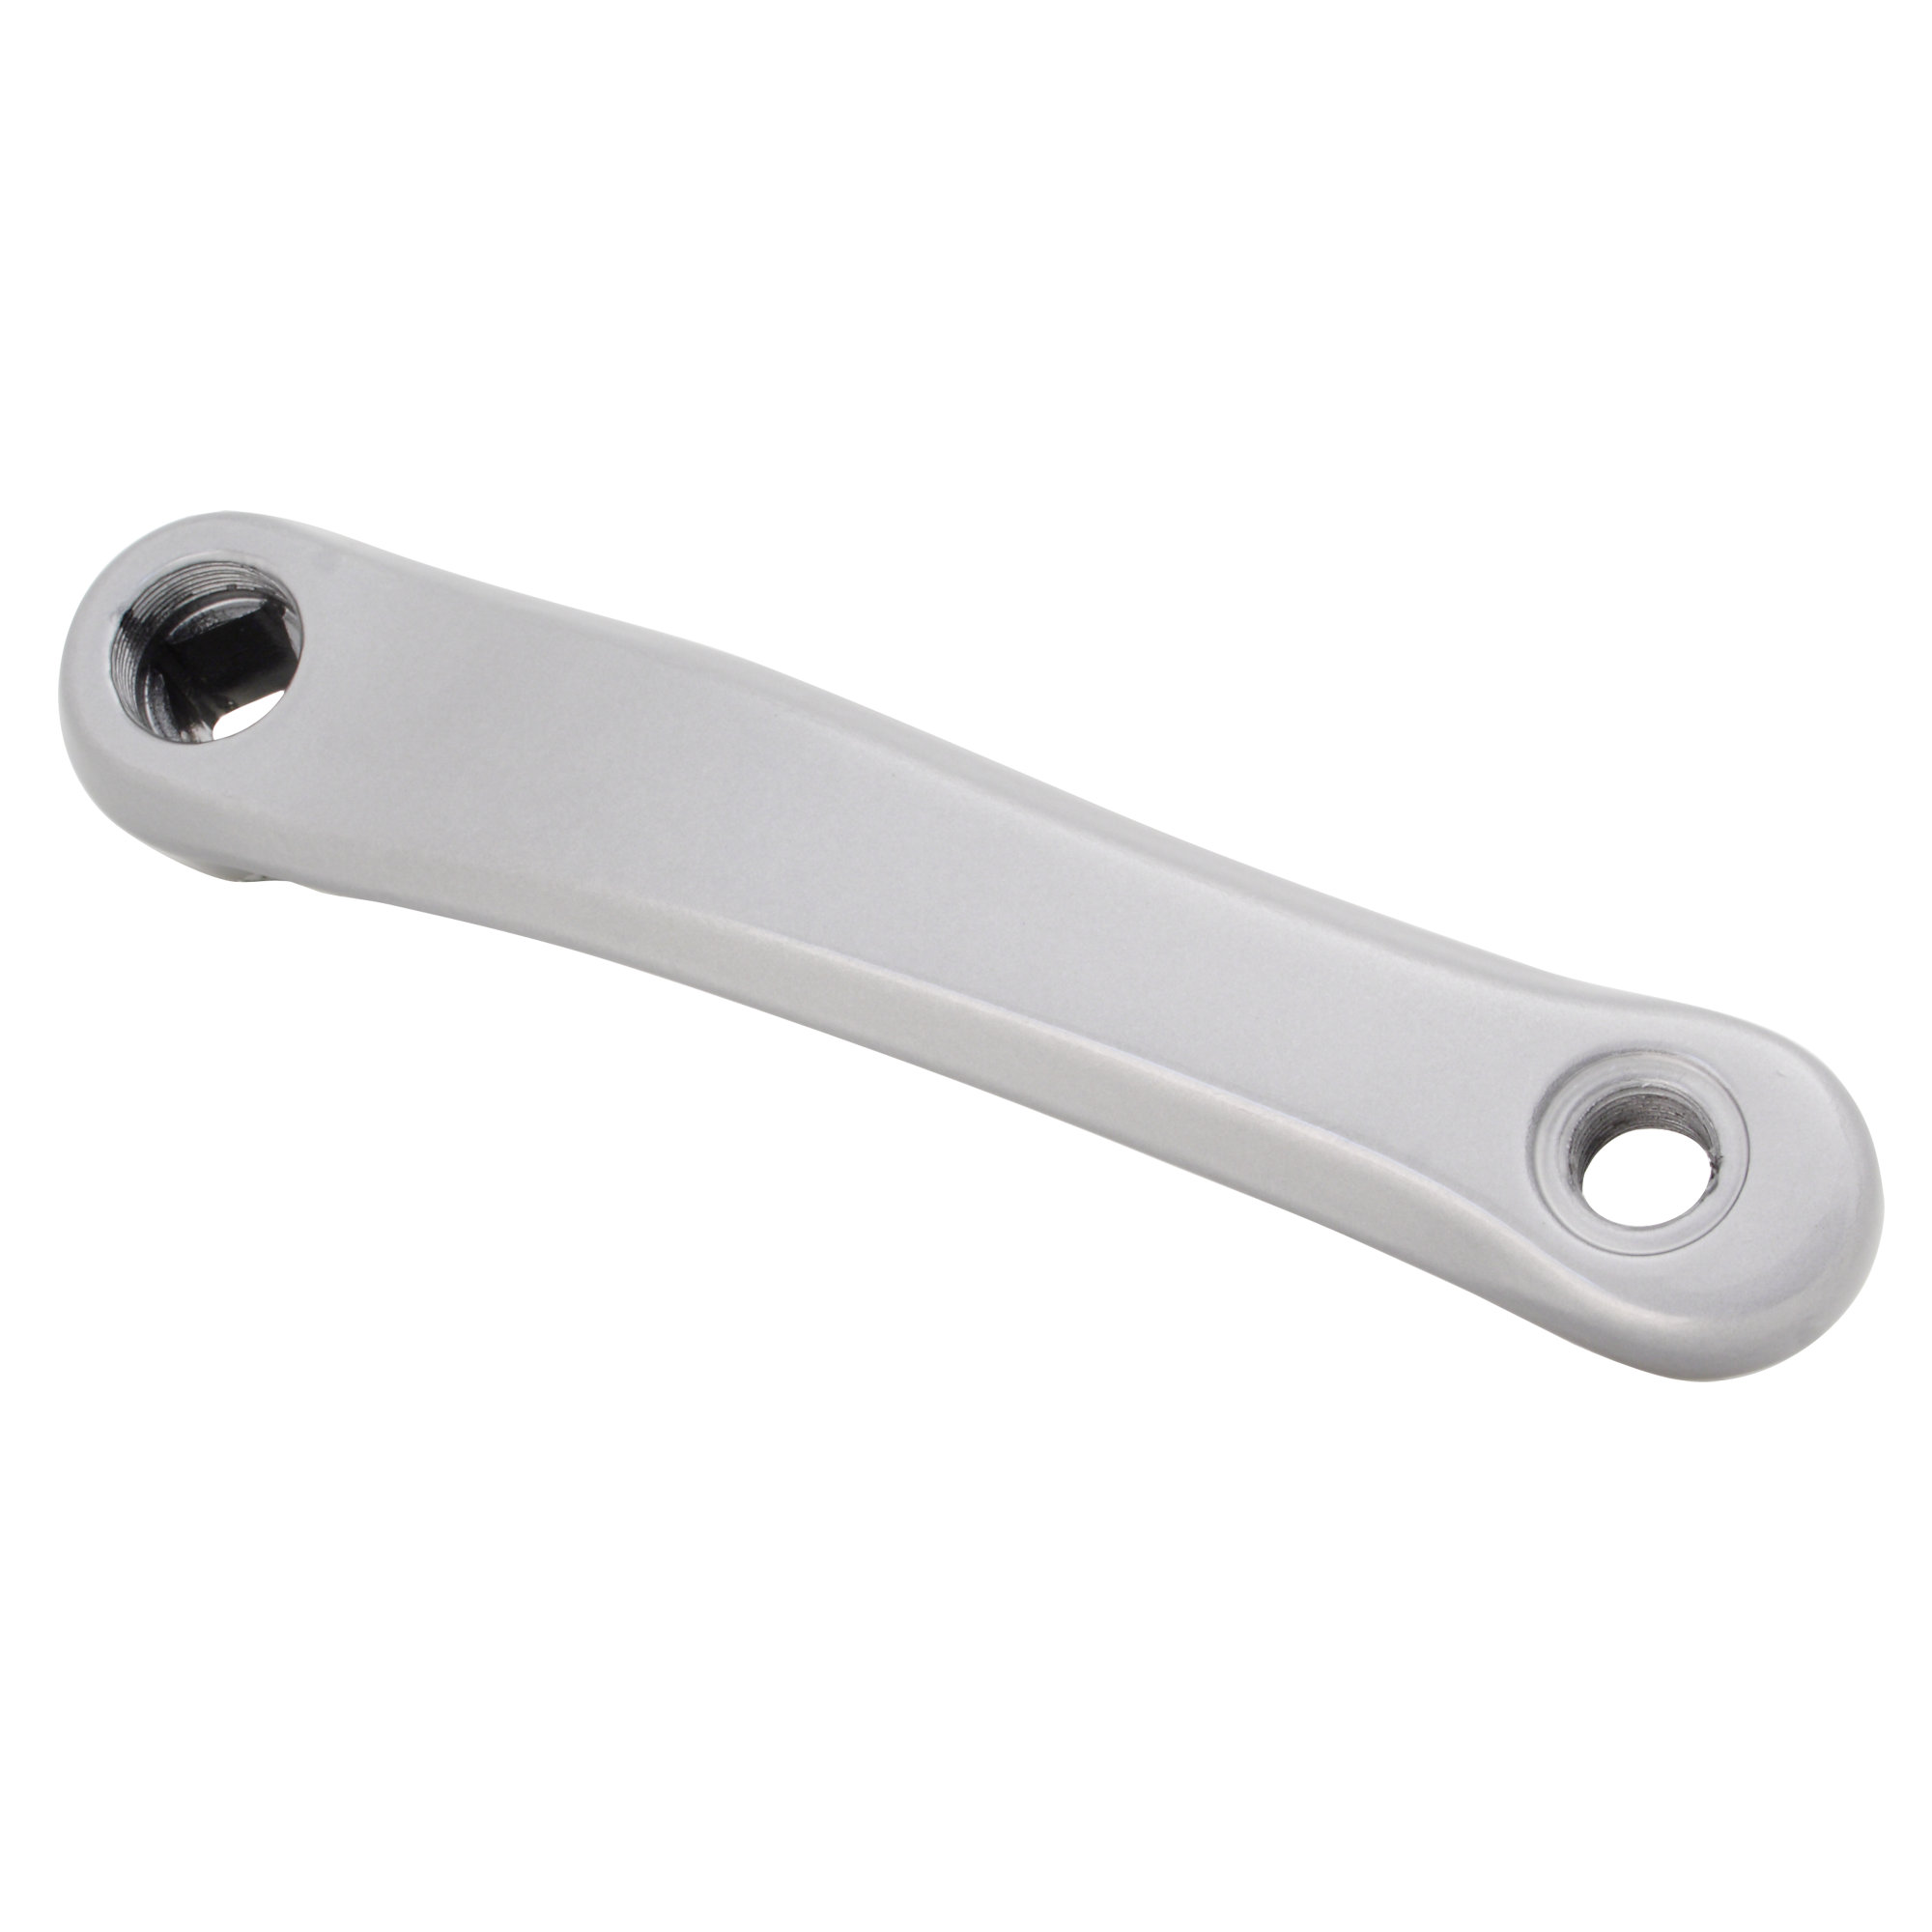 Left Crank Arm for Matrix S Series Indoor Cycles, Bikes with Silver Frame